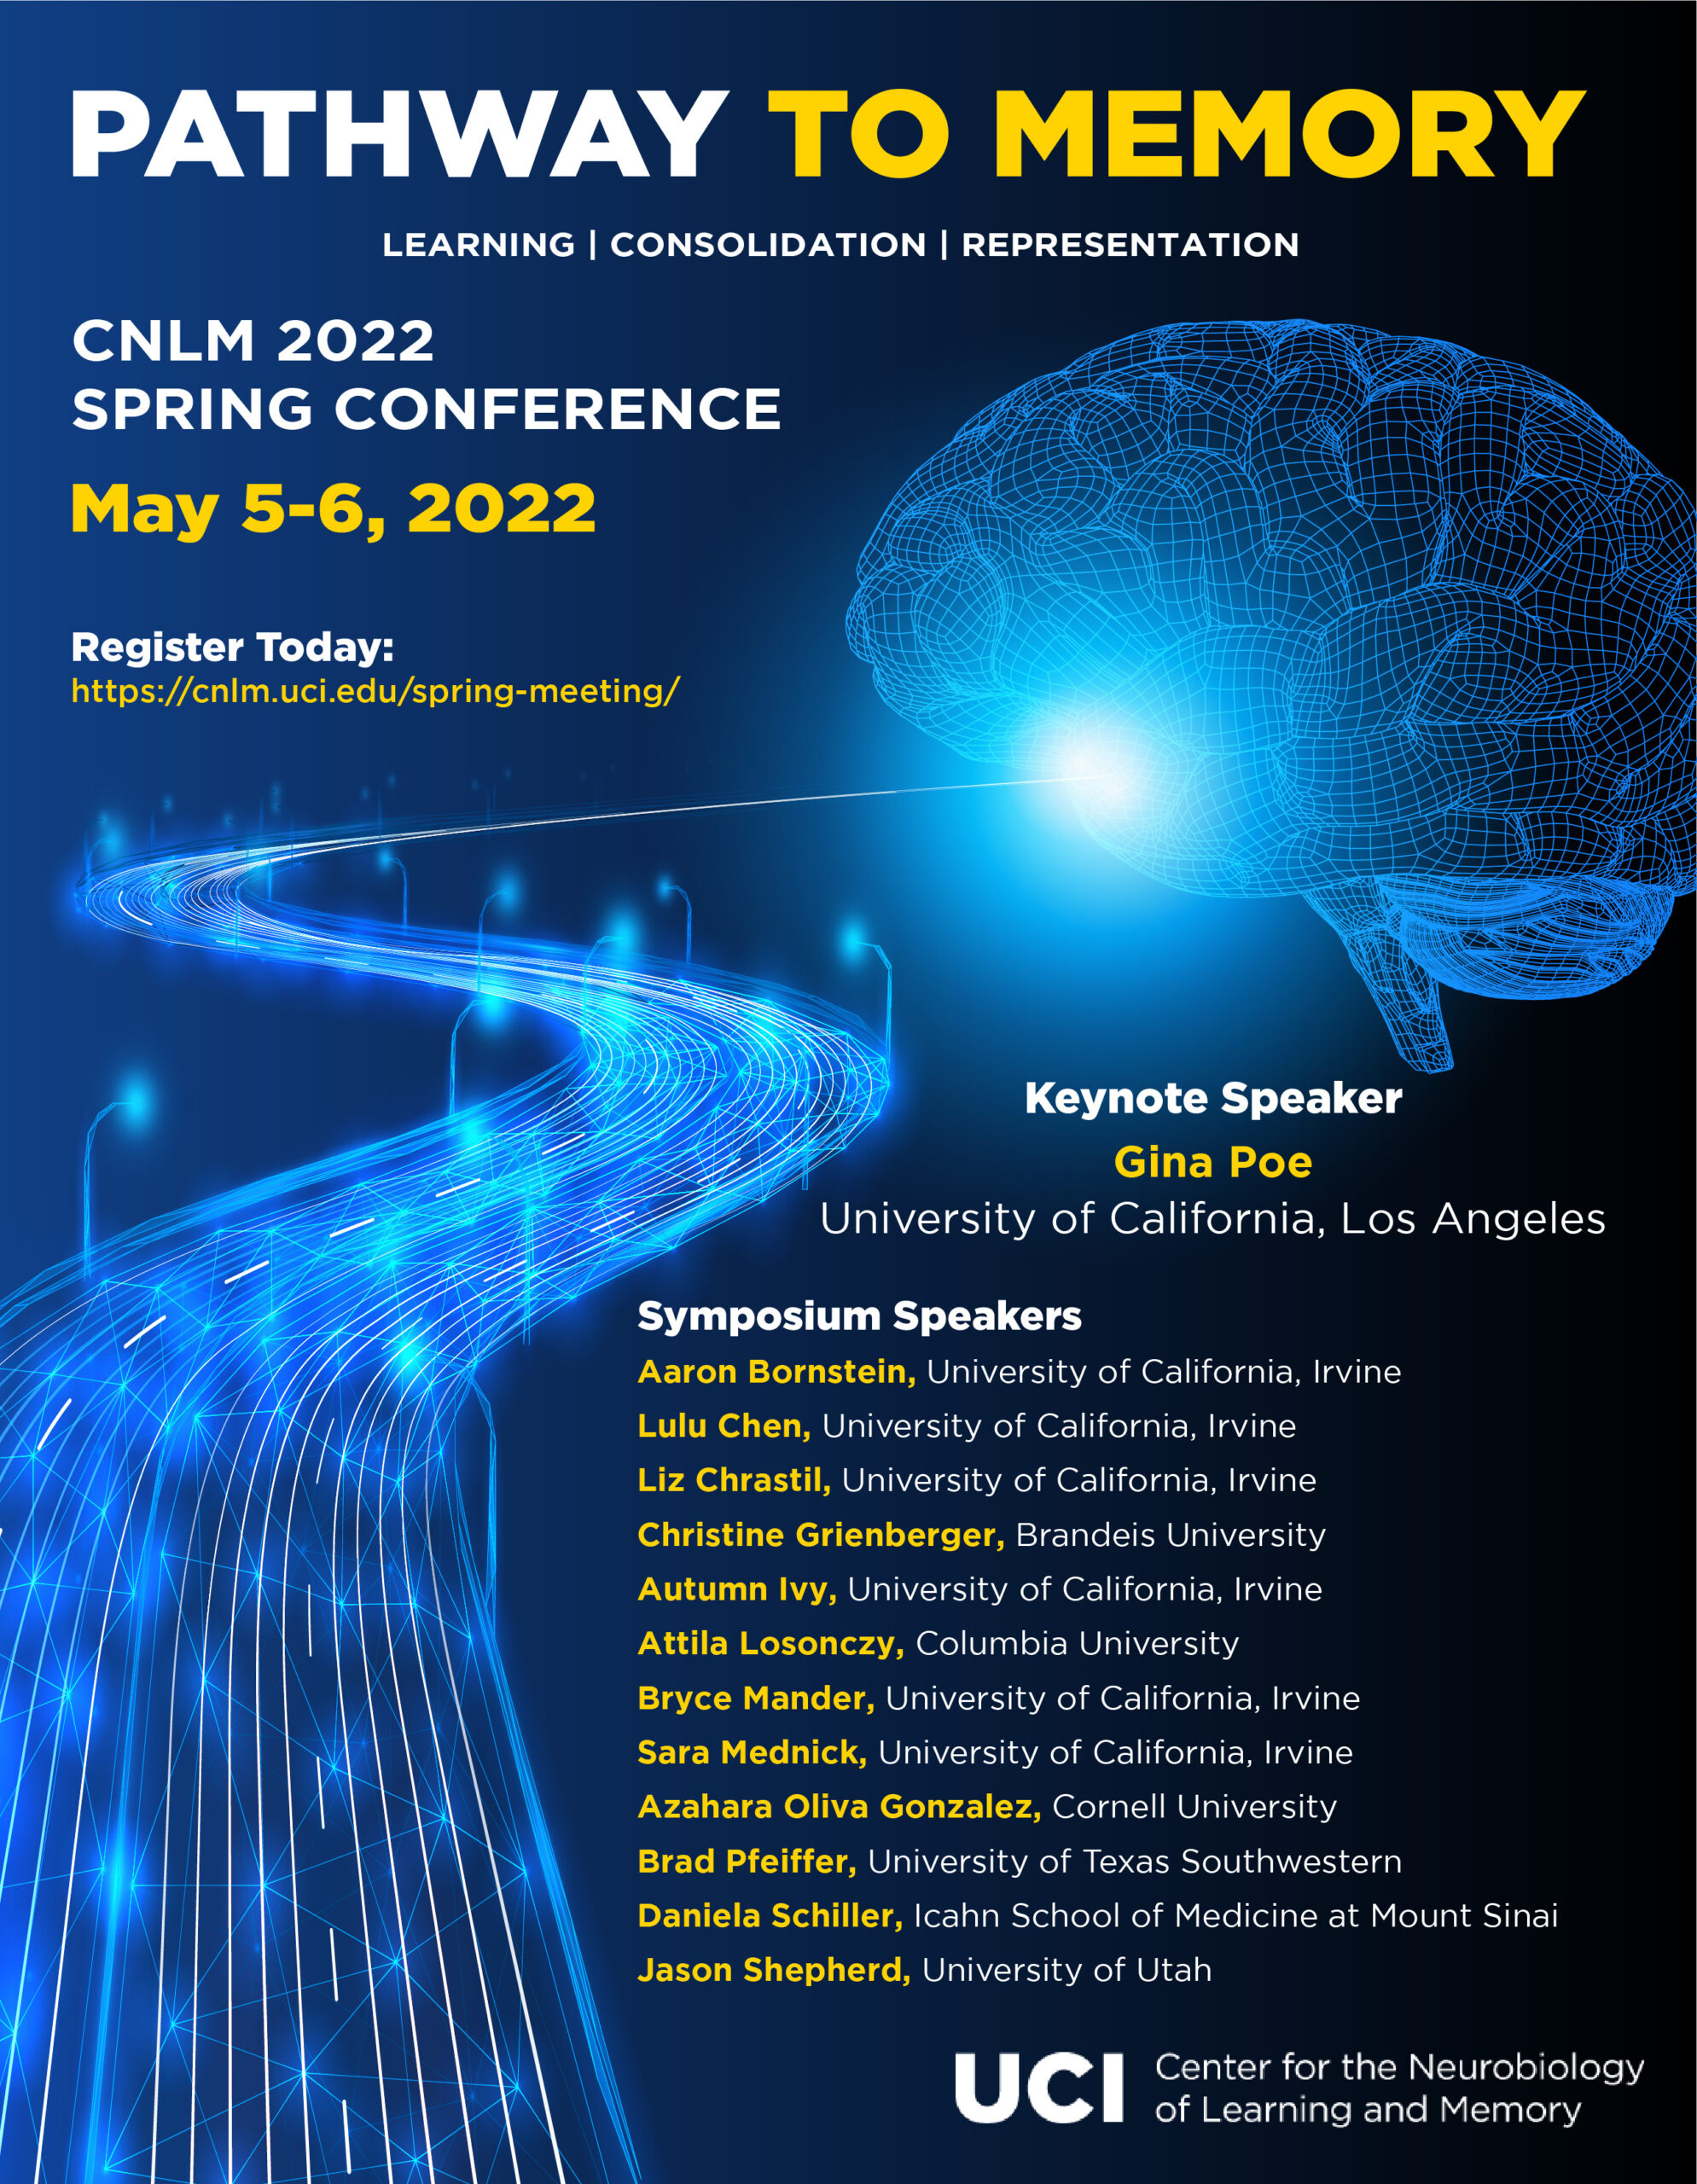 CNLM 2022 Spring Conference: Pathway to Memory; Current research in neuroscience; neuroscience expert